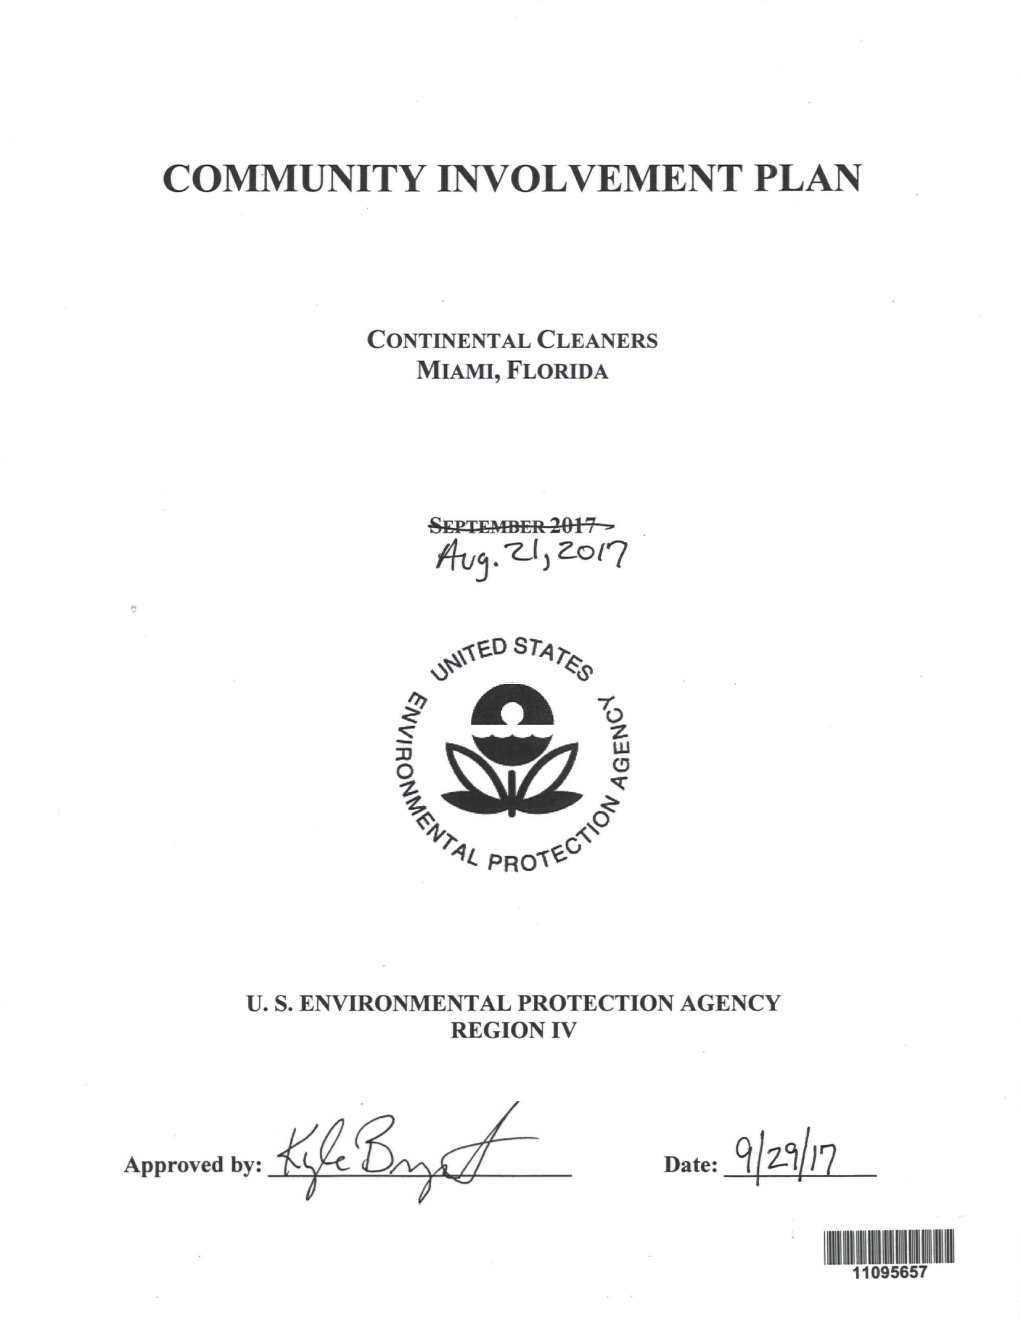 Community Involvement Plan, Continental Cleaners, Miami